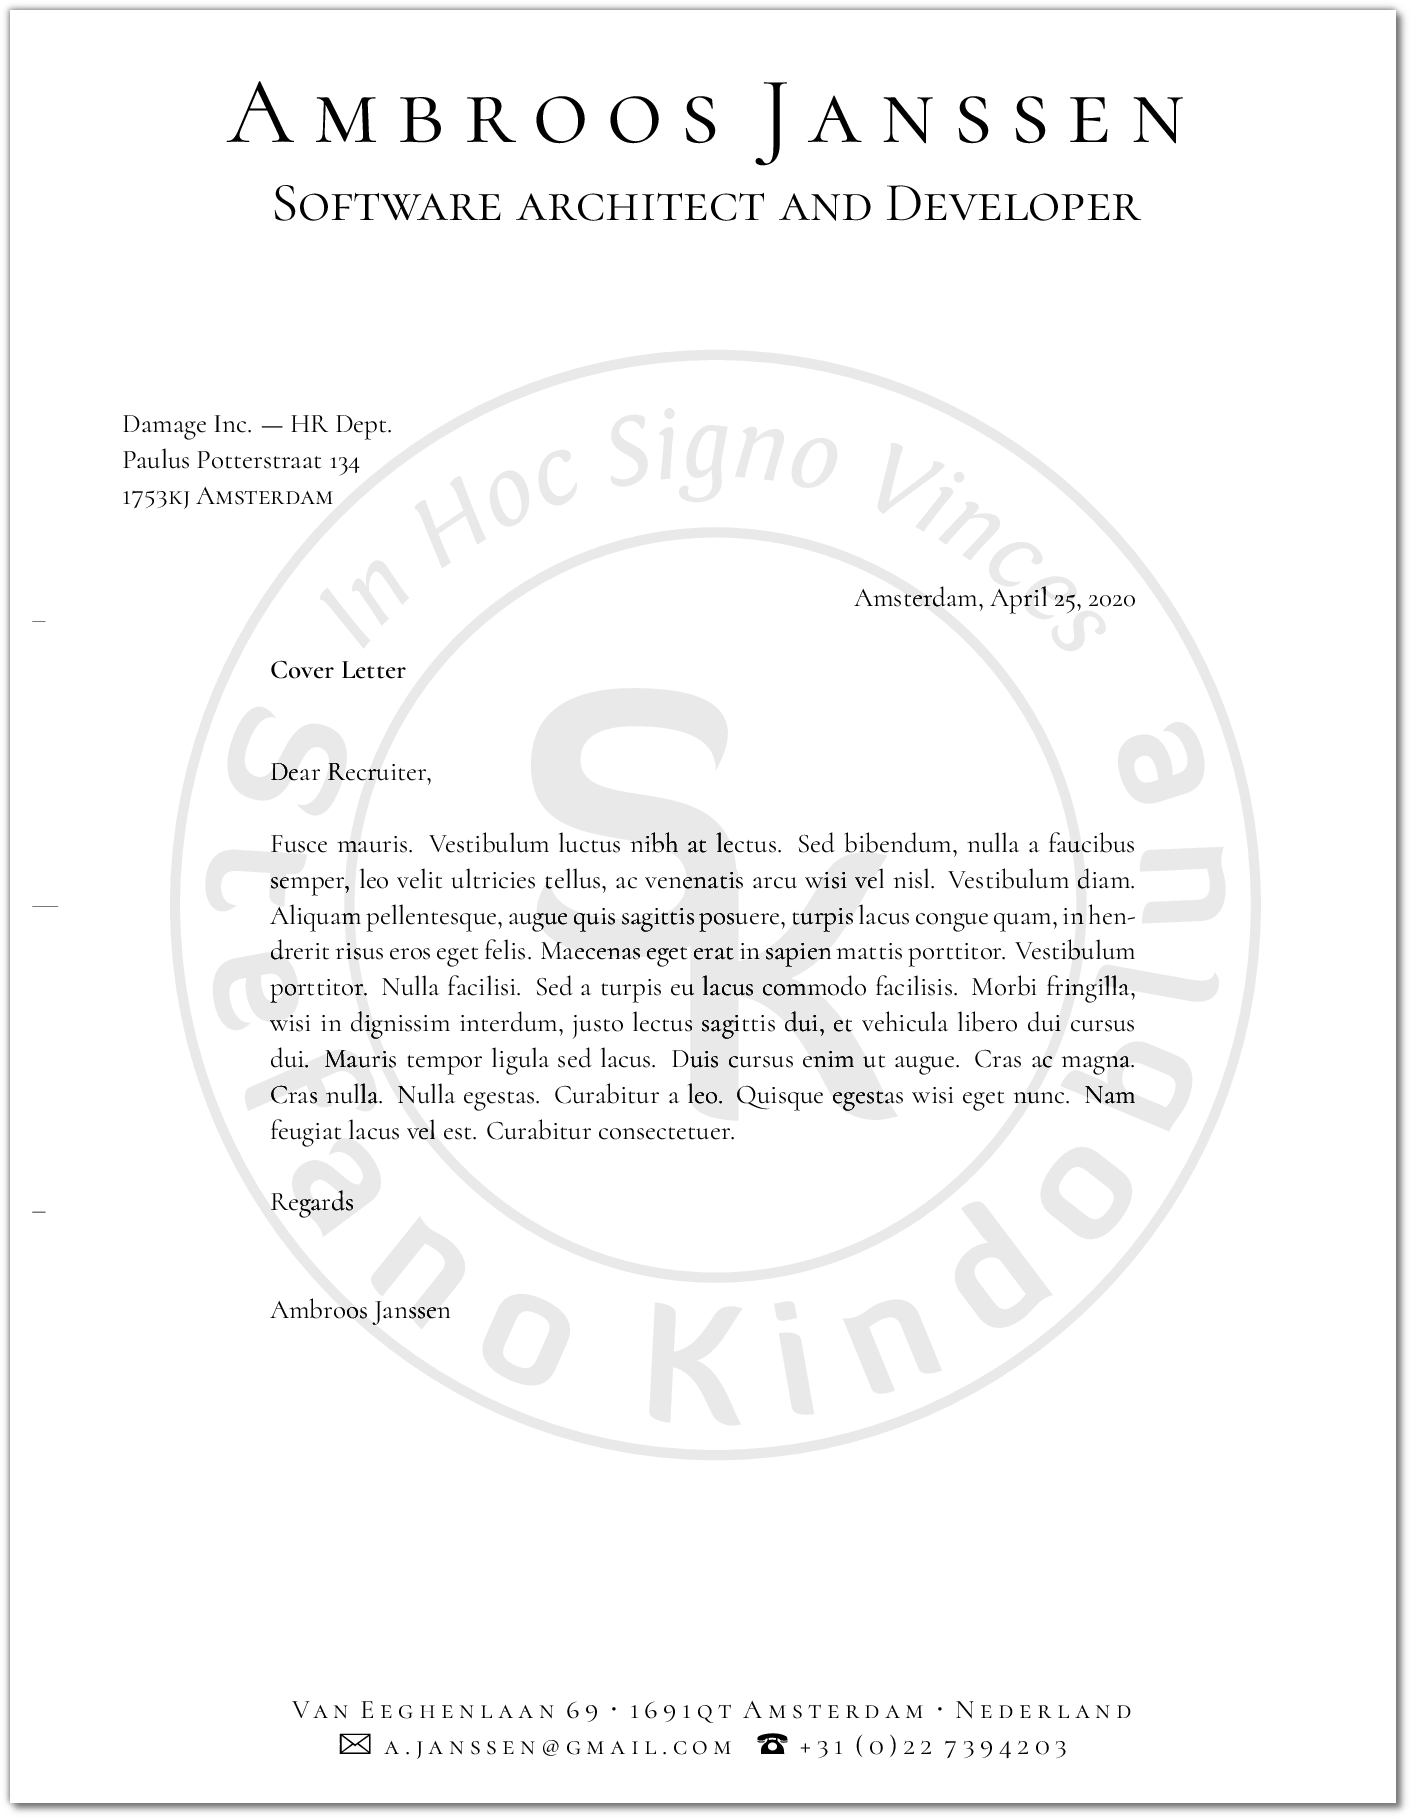 Sample letter with logo